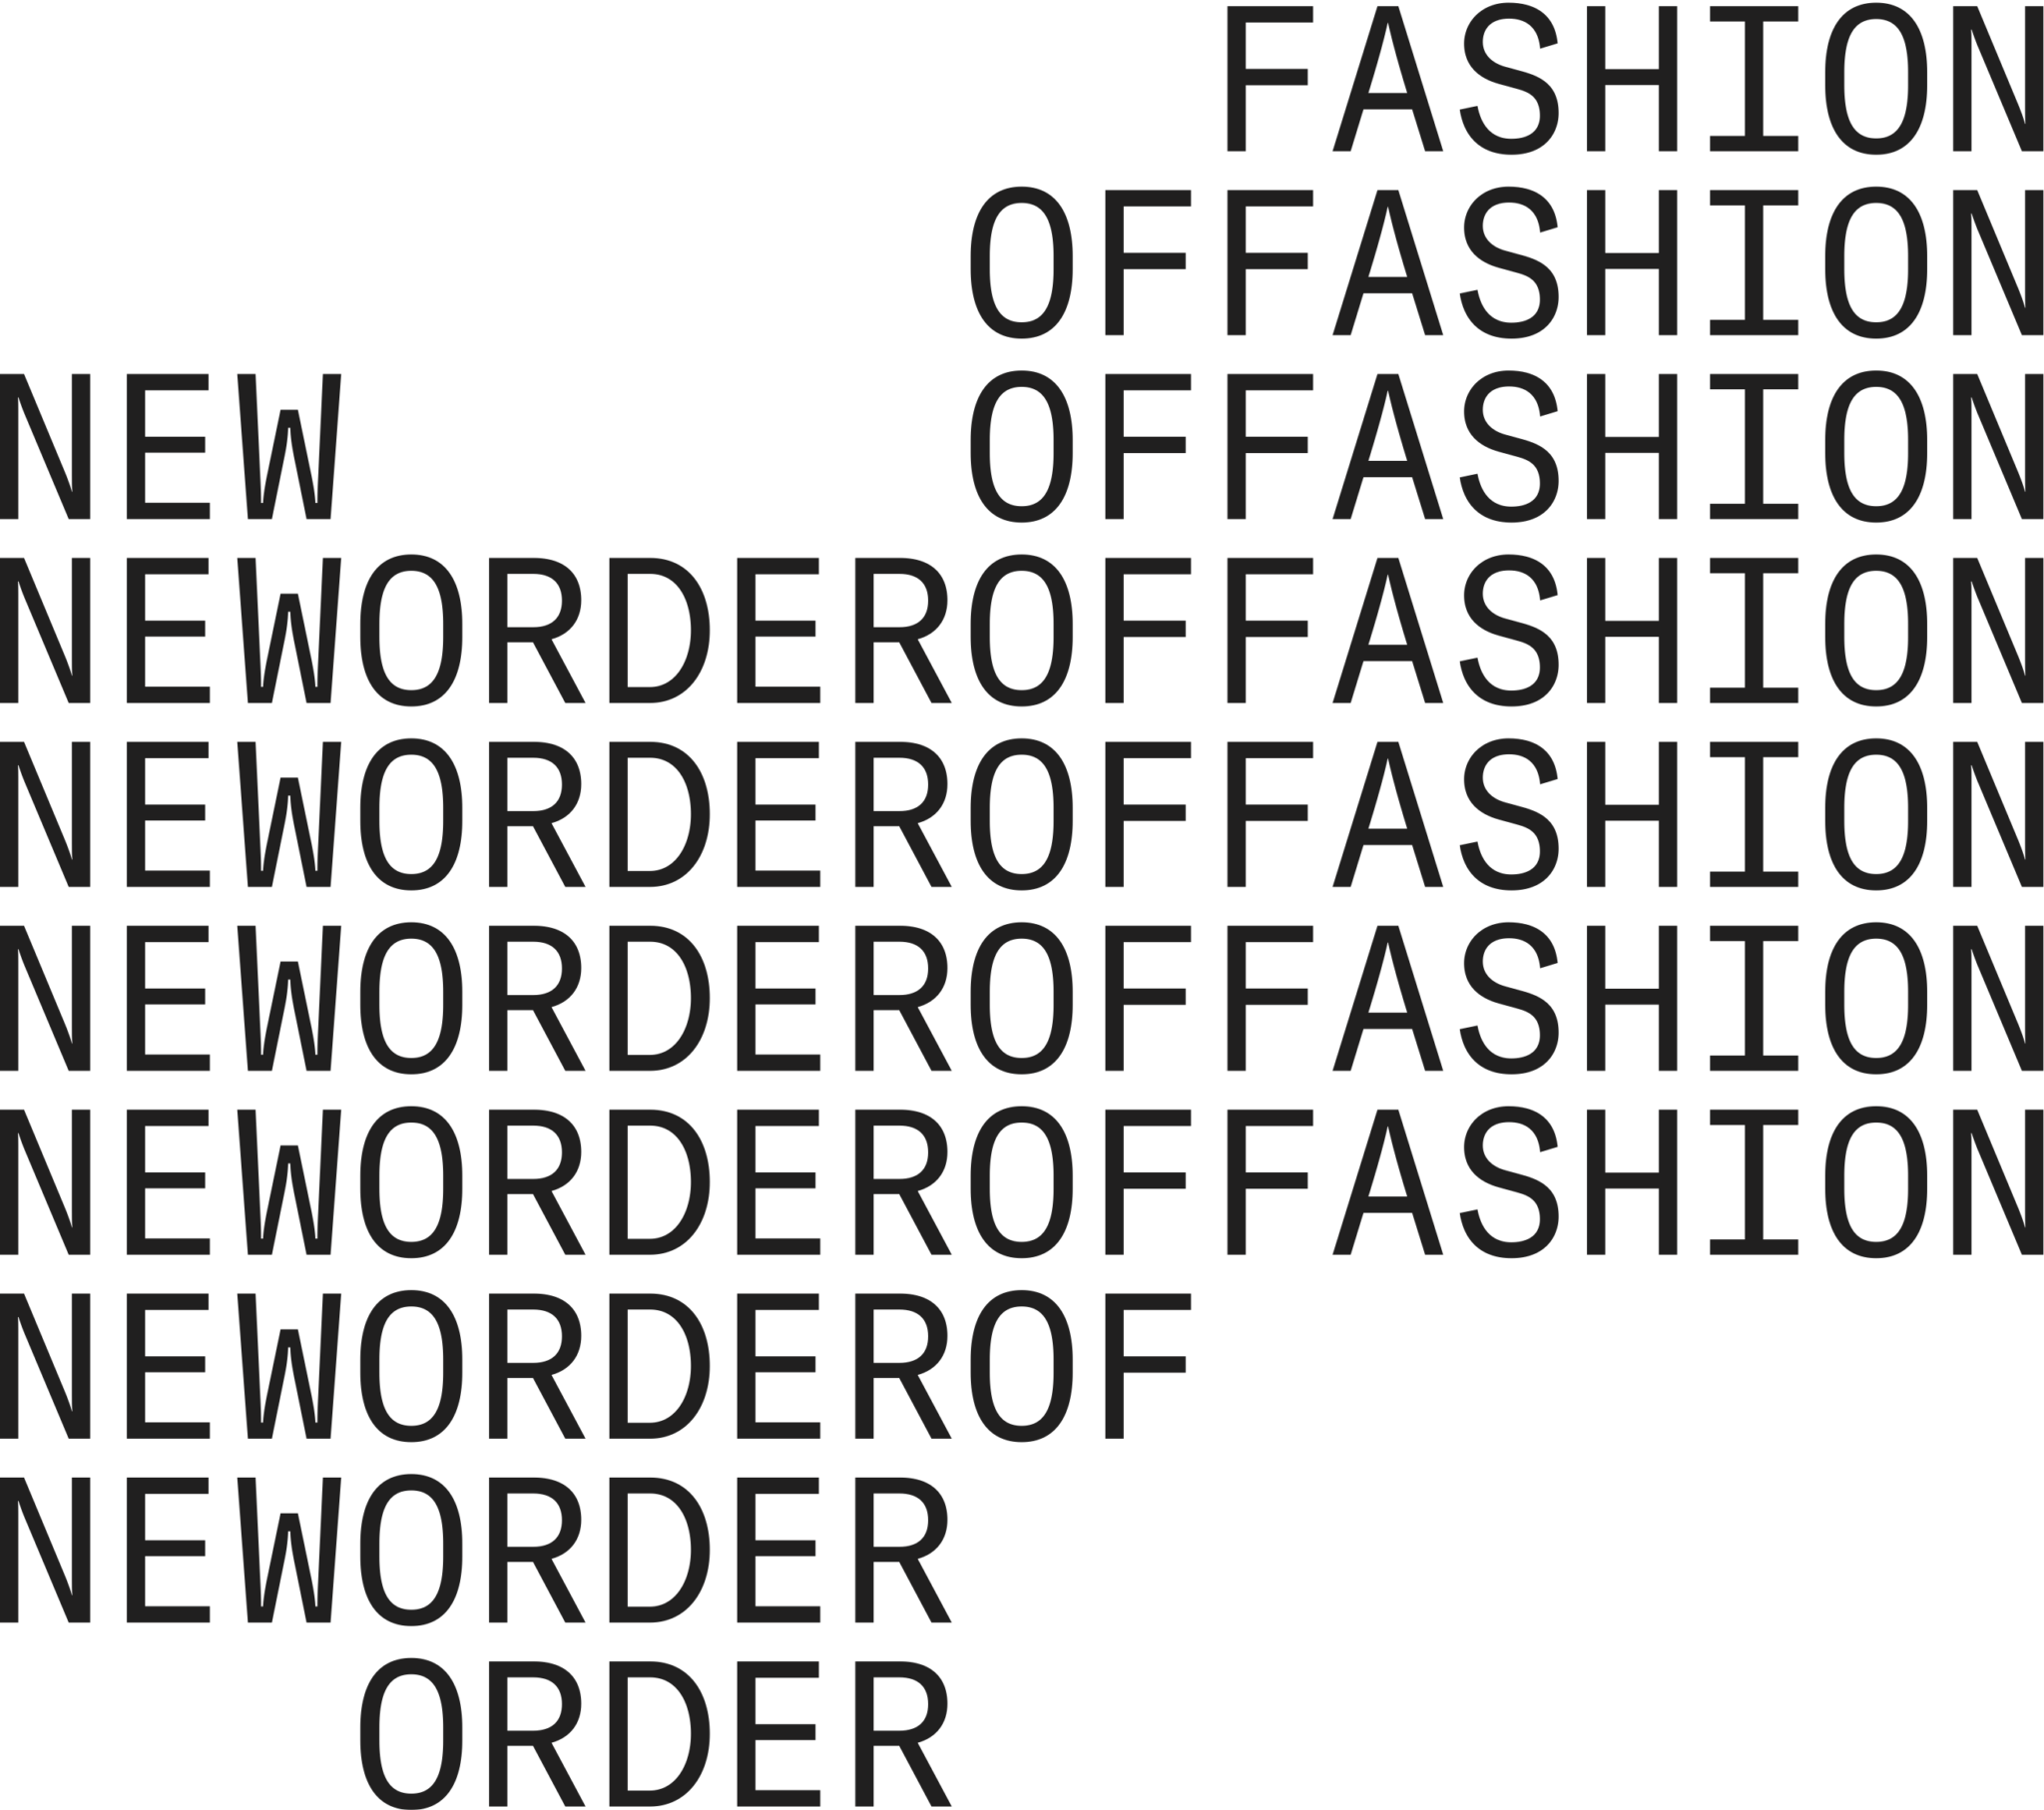 New Order of Fashion